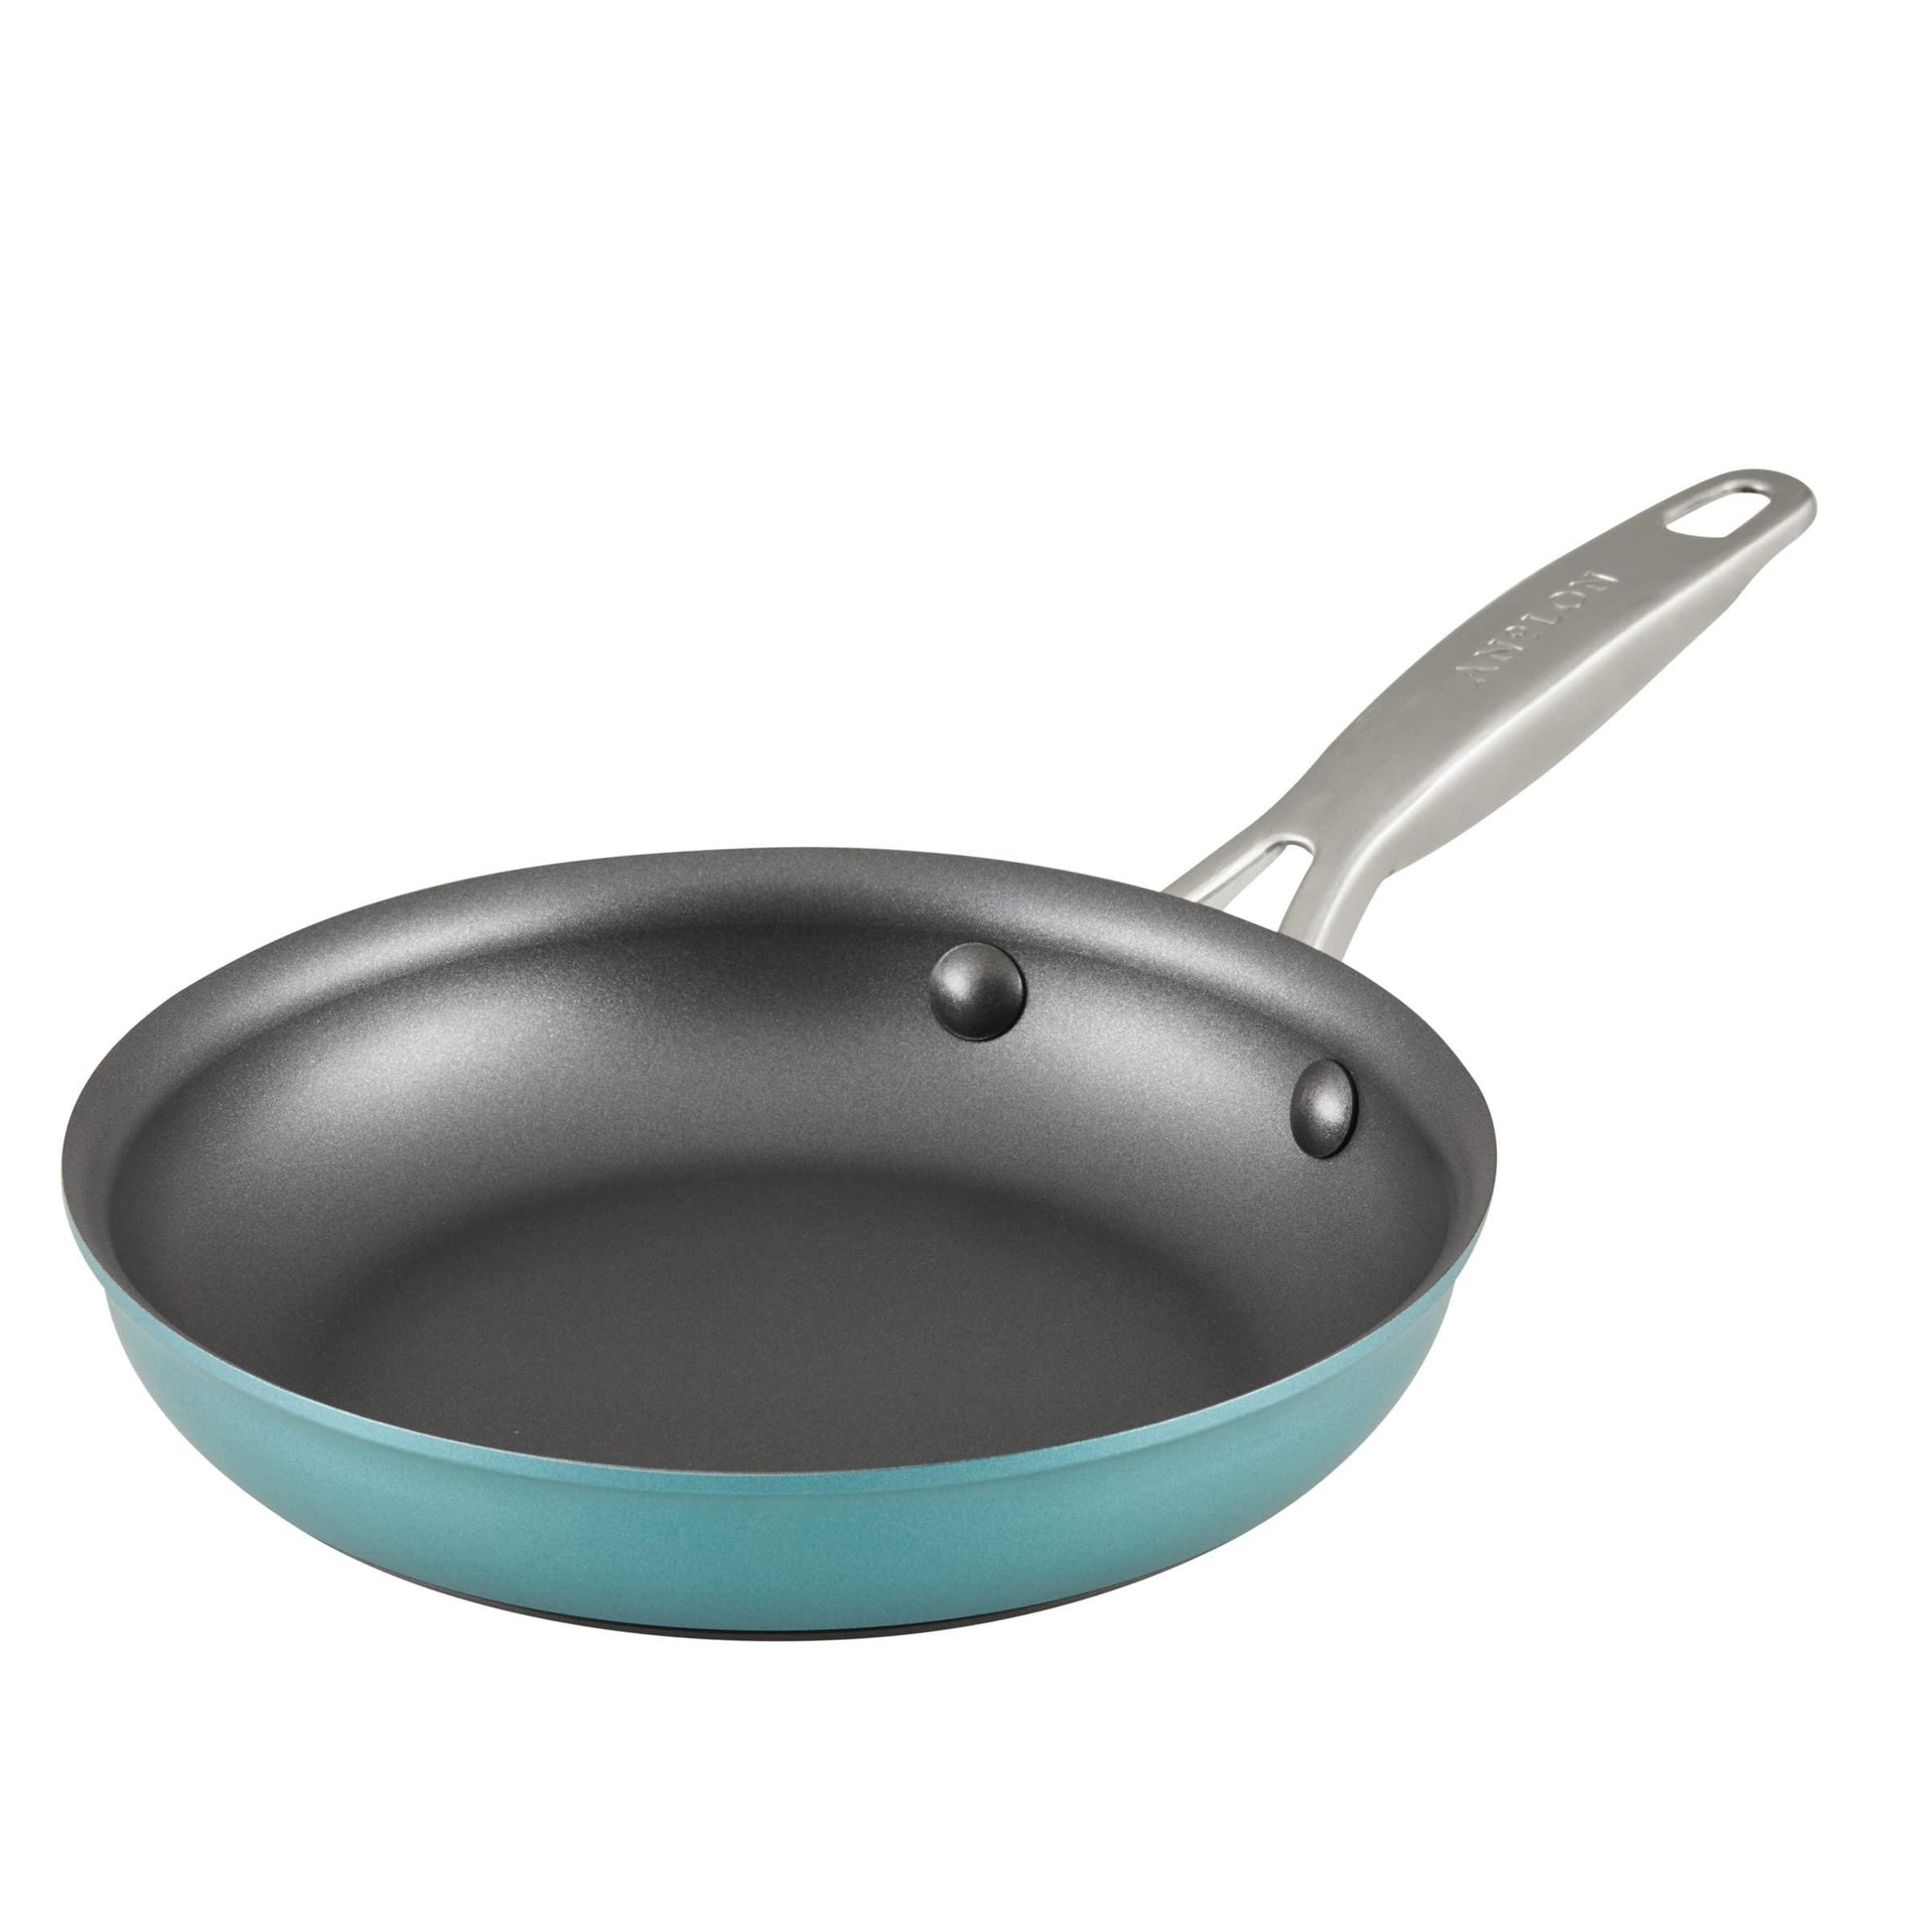 Anolon Achieve Hard Anodized Nonstick Frying Pan/Skillet, 8.25 Inch, Teal - CookCave